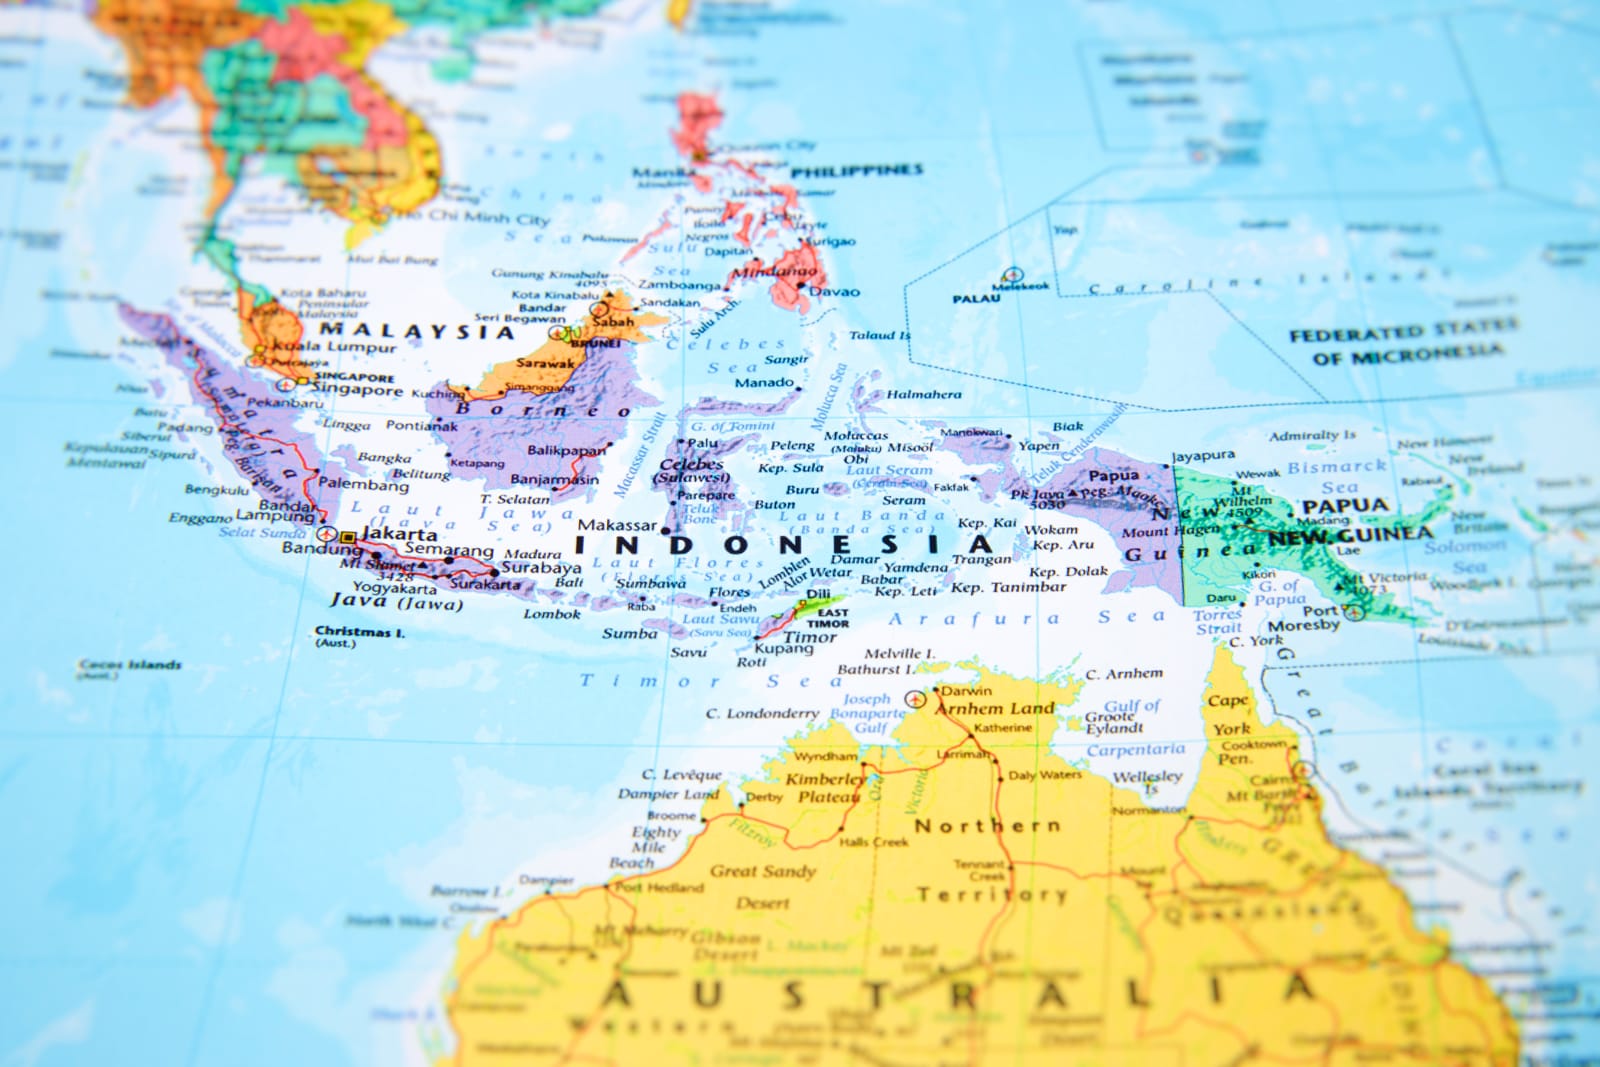 Indonesia is not just the largest country in Southeast Asia by population, economy and territory, it is also the closest to Australia (Getty Images Plus)